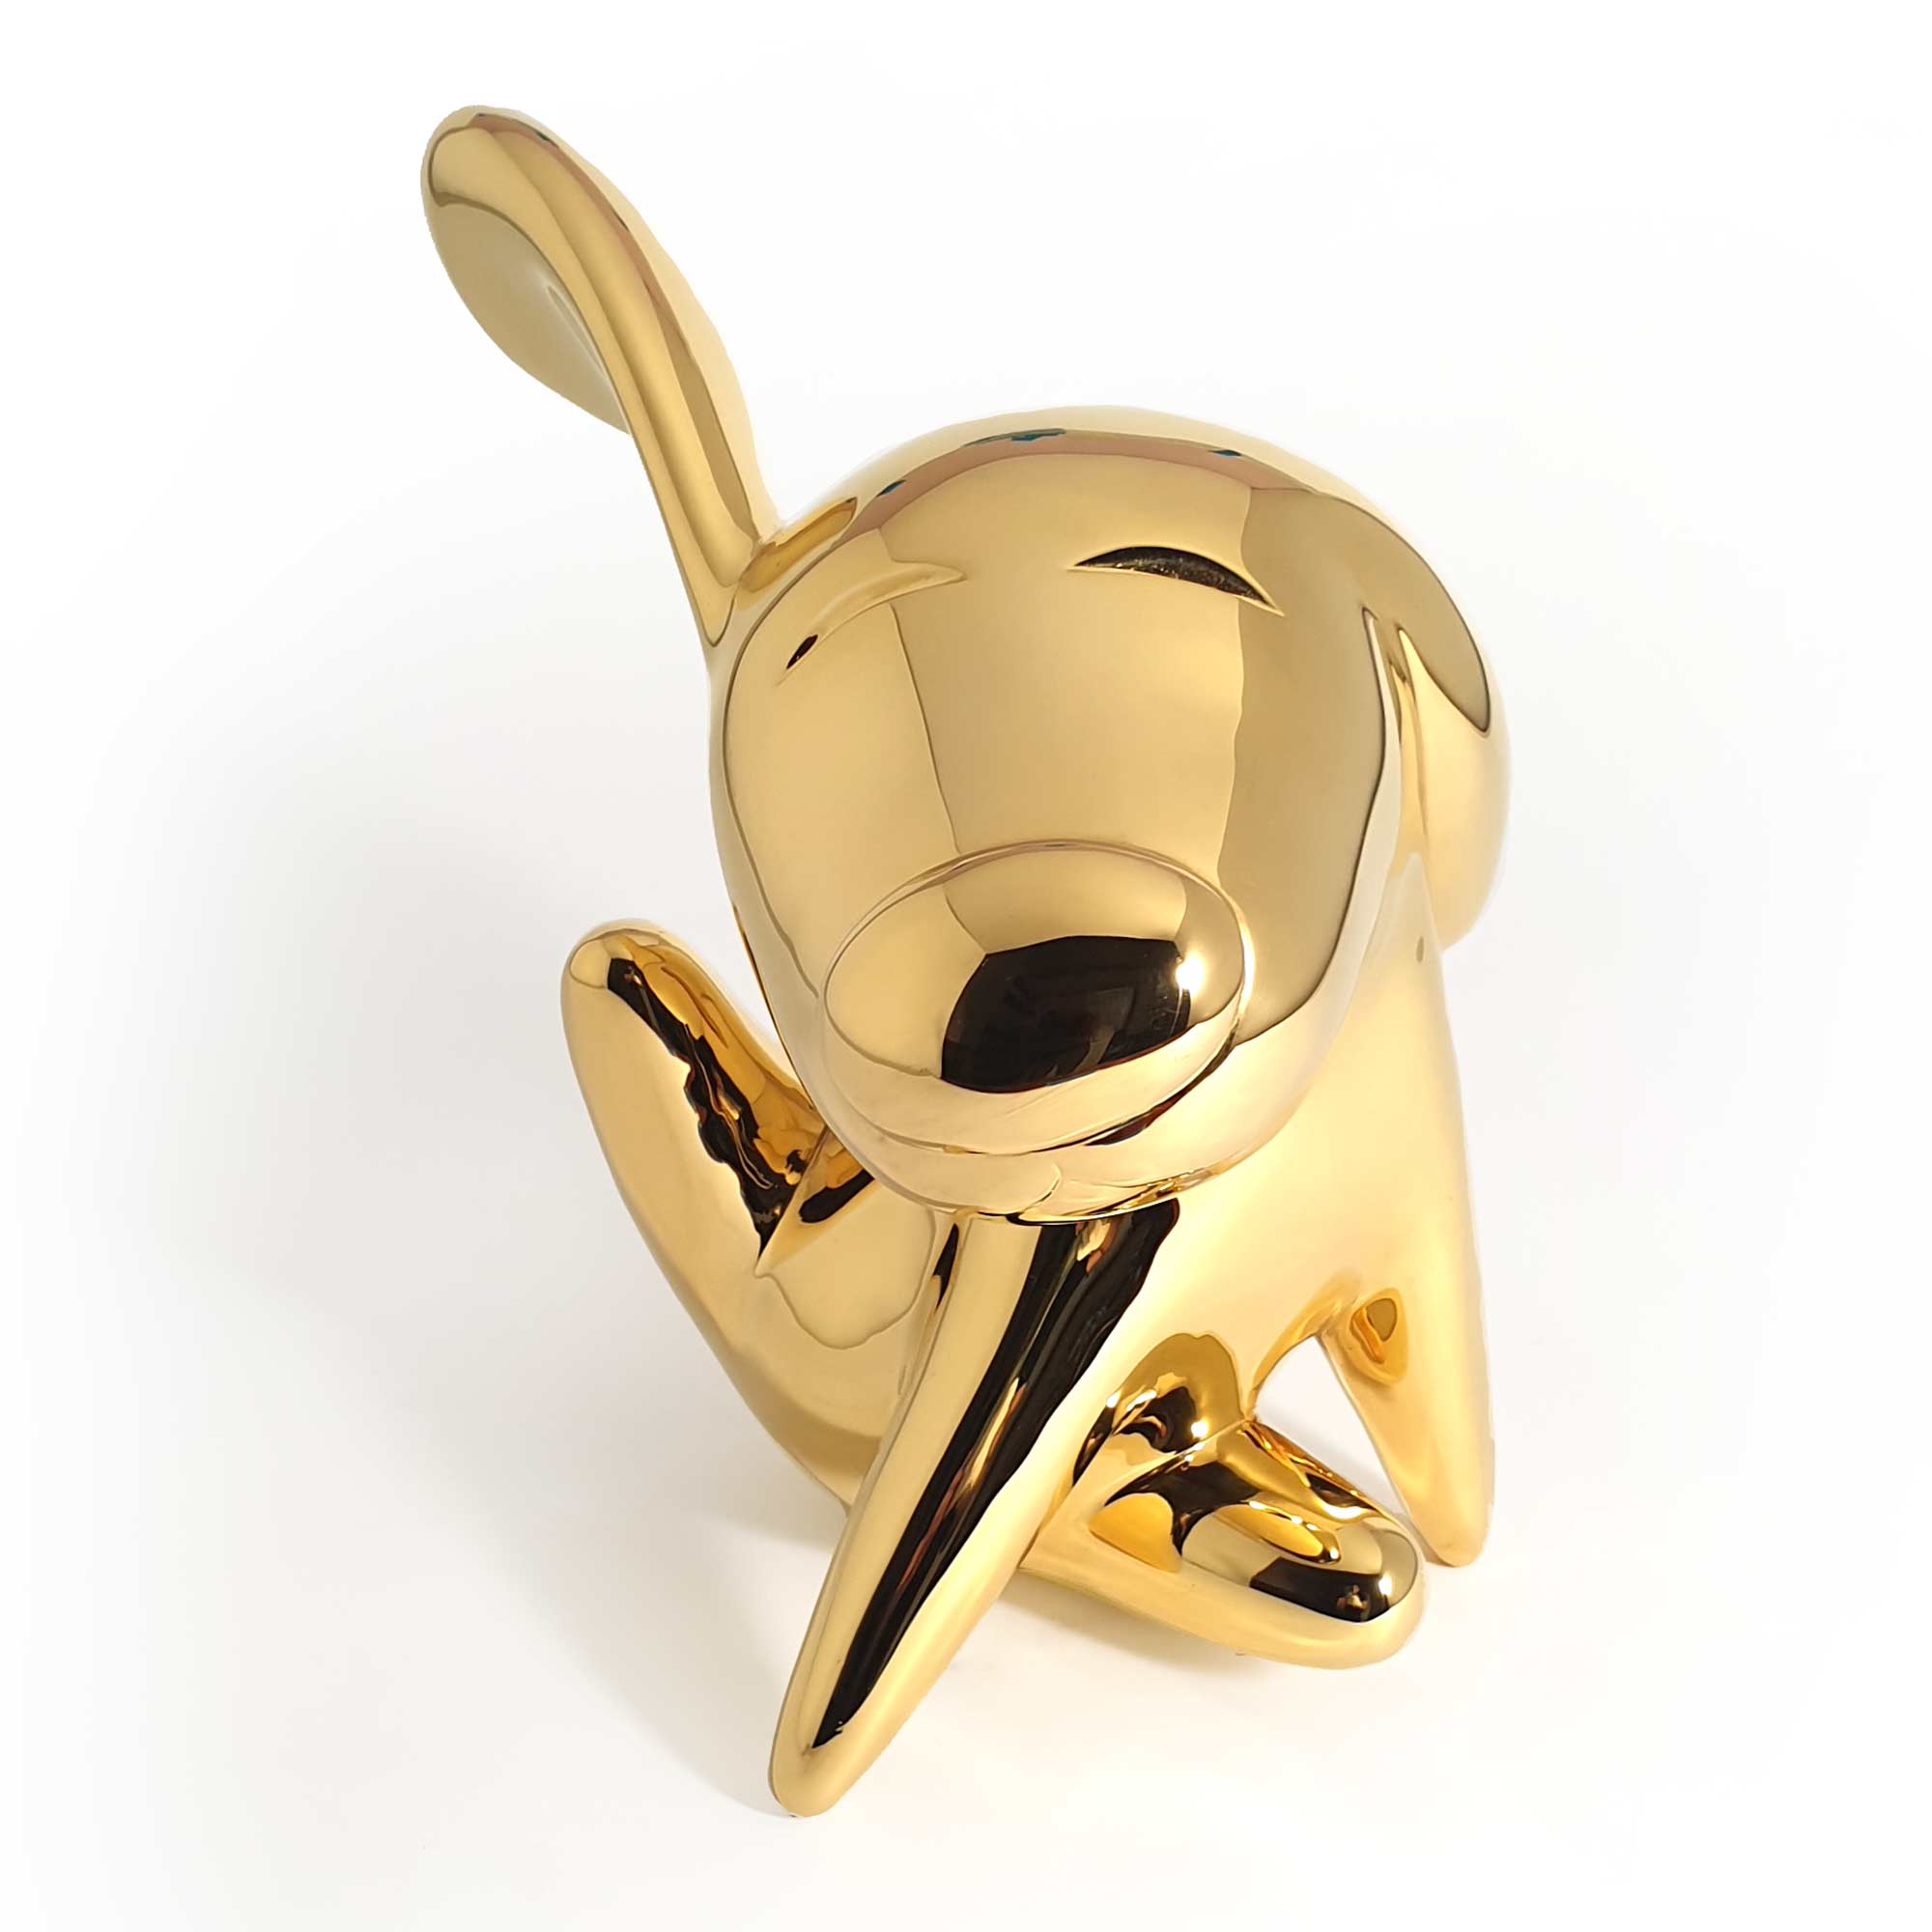 The itch, dog sculpture, Gold Mirror Polished Stainless Steel Sculpture, by artist Ferdi B Dick, front view